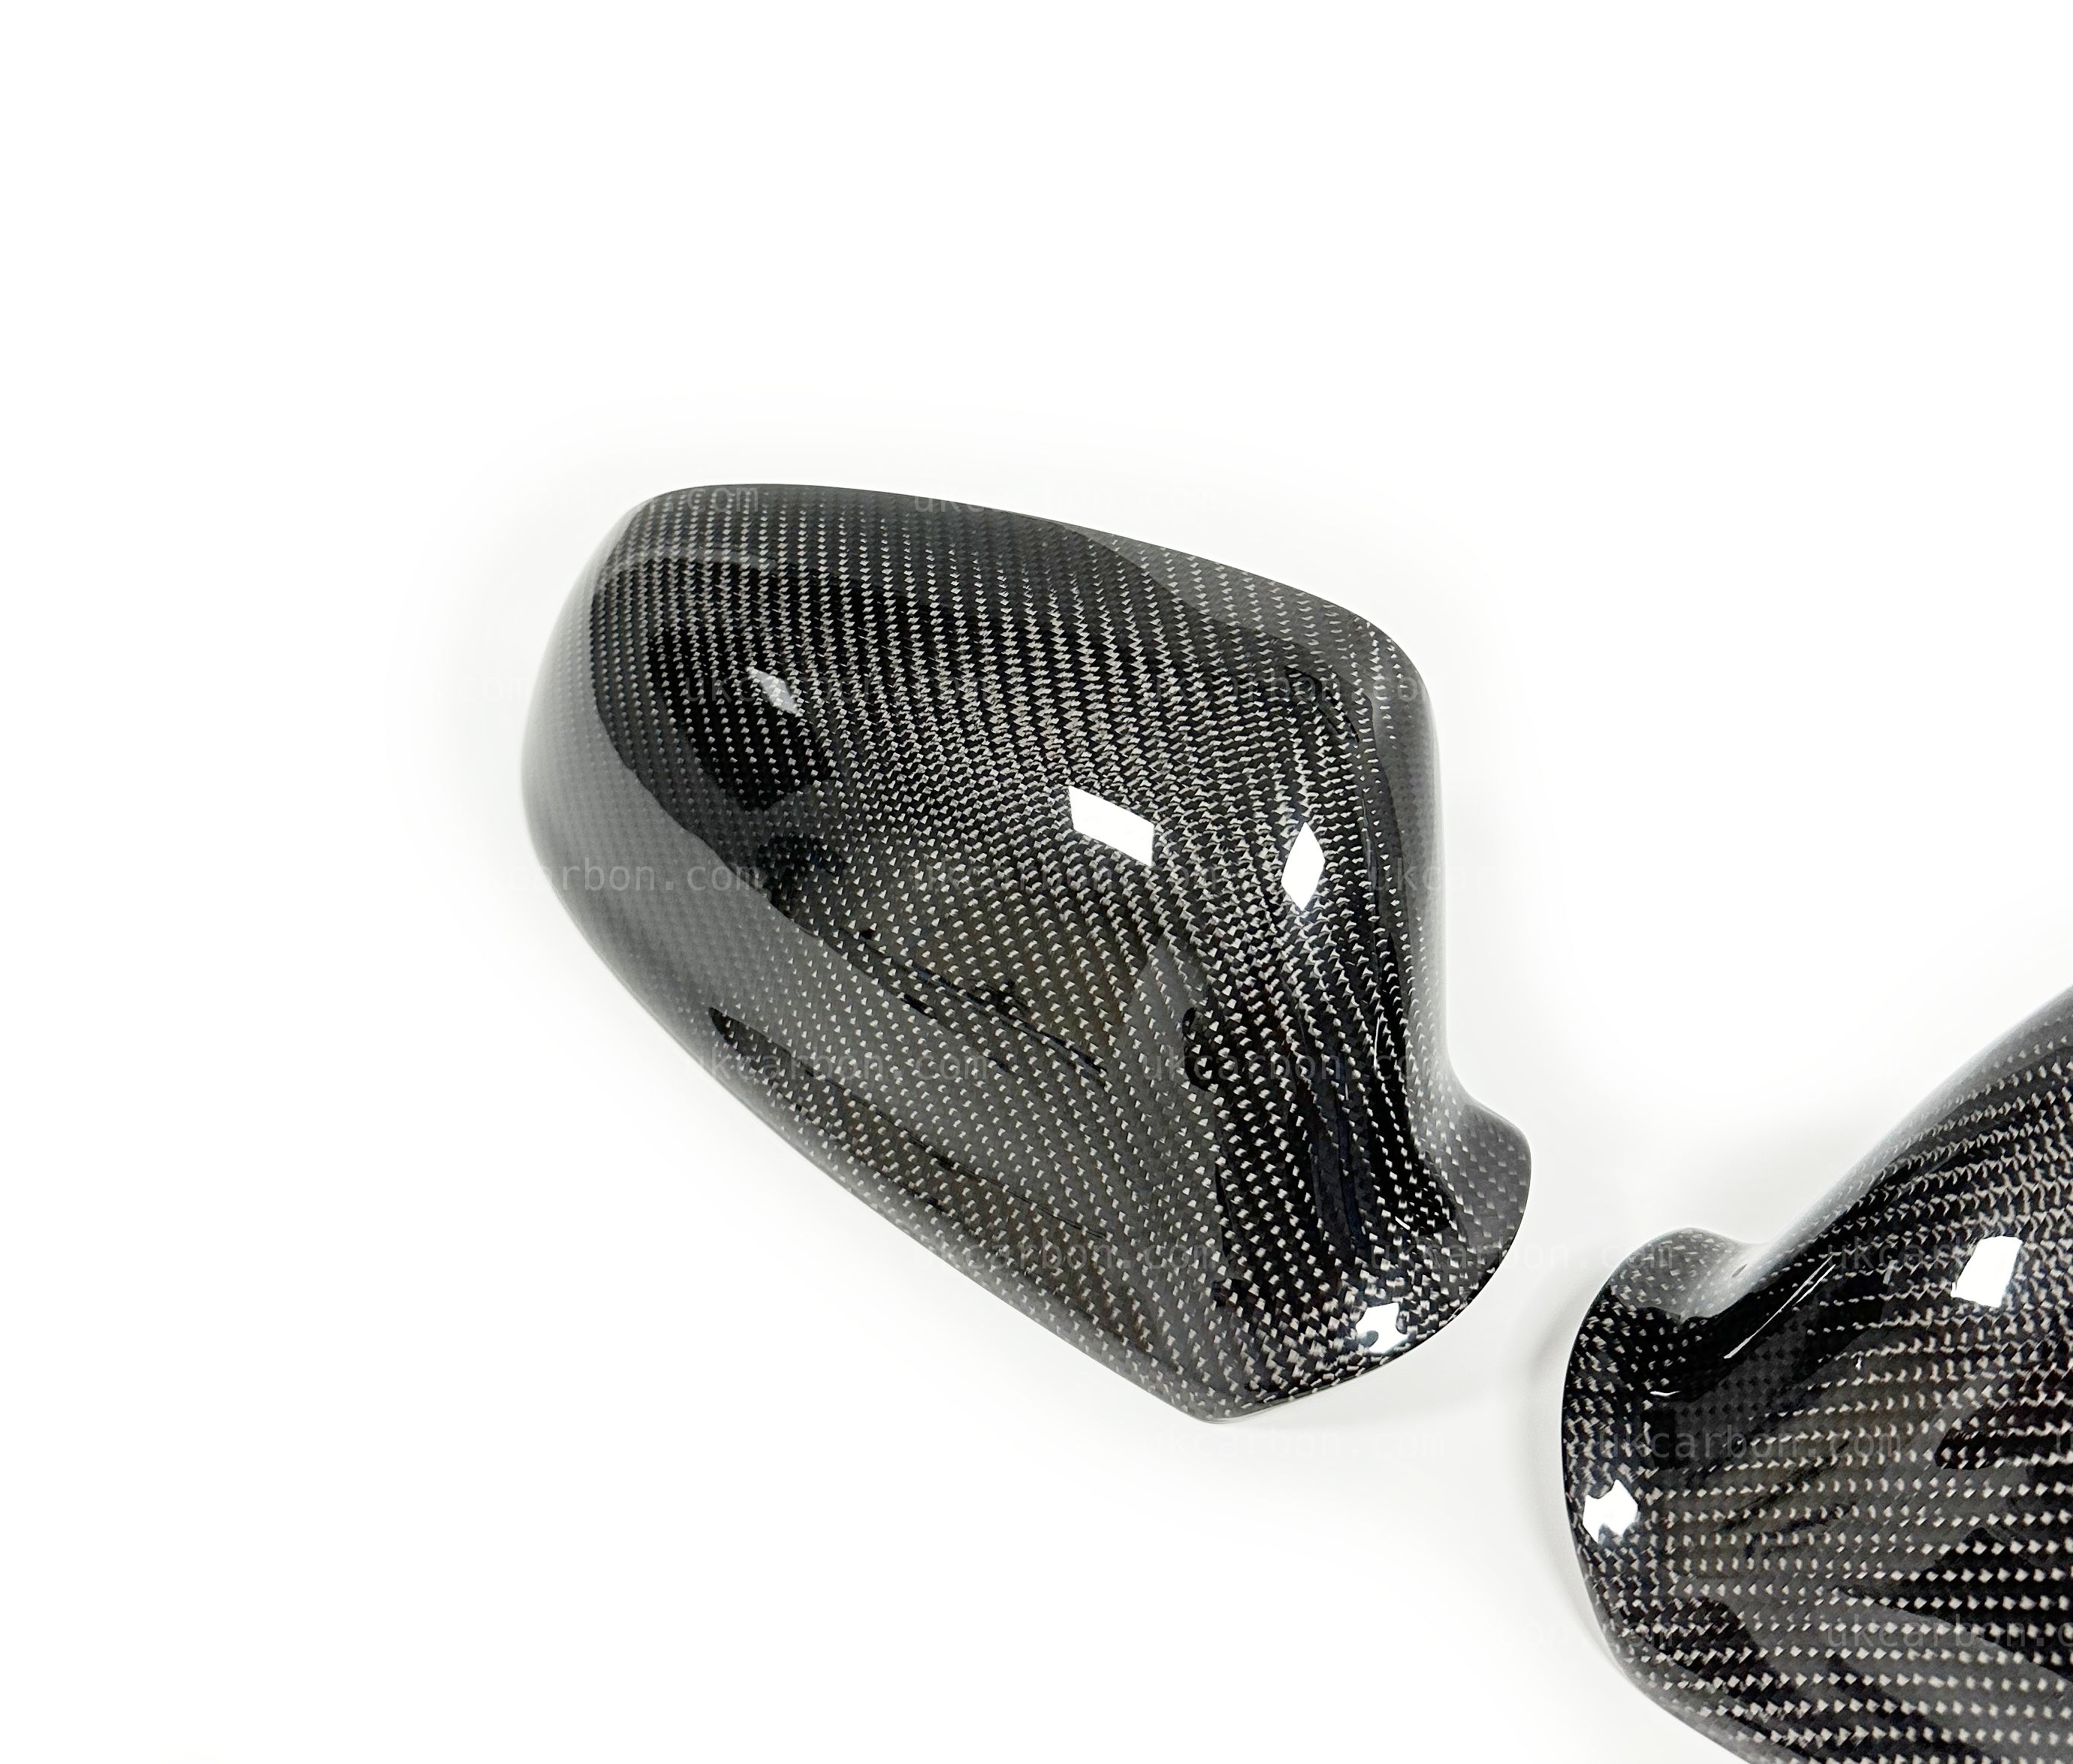 Vauxhall Astra Carbon Mirror Wing Cover Replacement J inc VXR by UKCarbon